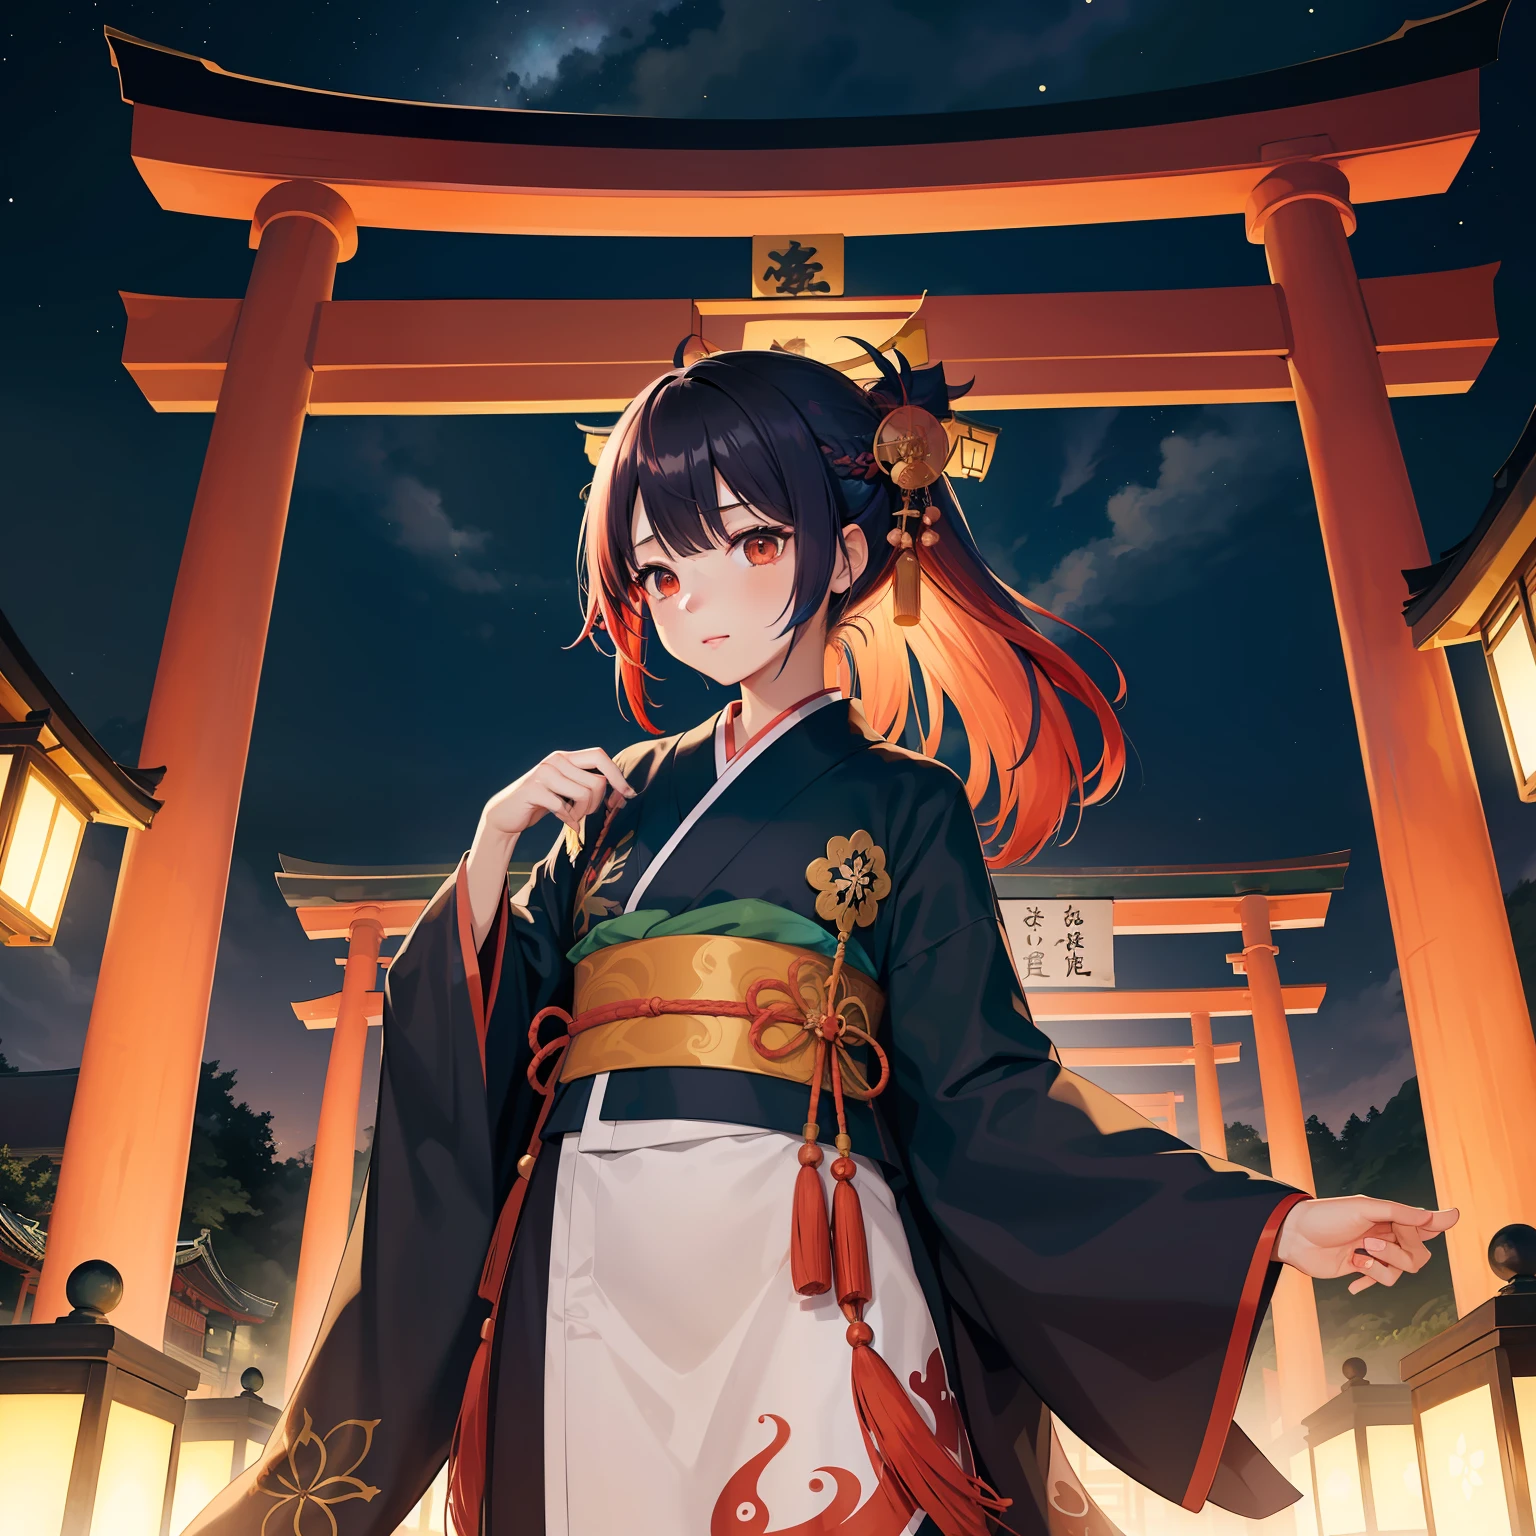 watercolor paiting(Beautifully Aesthetic:1.2)、(1girl in:1.3)、(Higanbana Hair、colourful hair、Half black and half red hair:1.2)、Eau、liquids、natta、colourfull、starrysky、stele、nigh sky、a dark night、Black kimono、Dance in front of a large torii gate、Landscape painting、glowing lanterns、Fantastical、shrineystical、the whole、